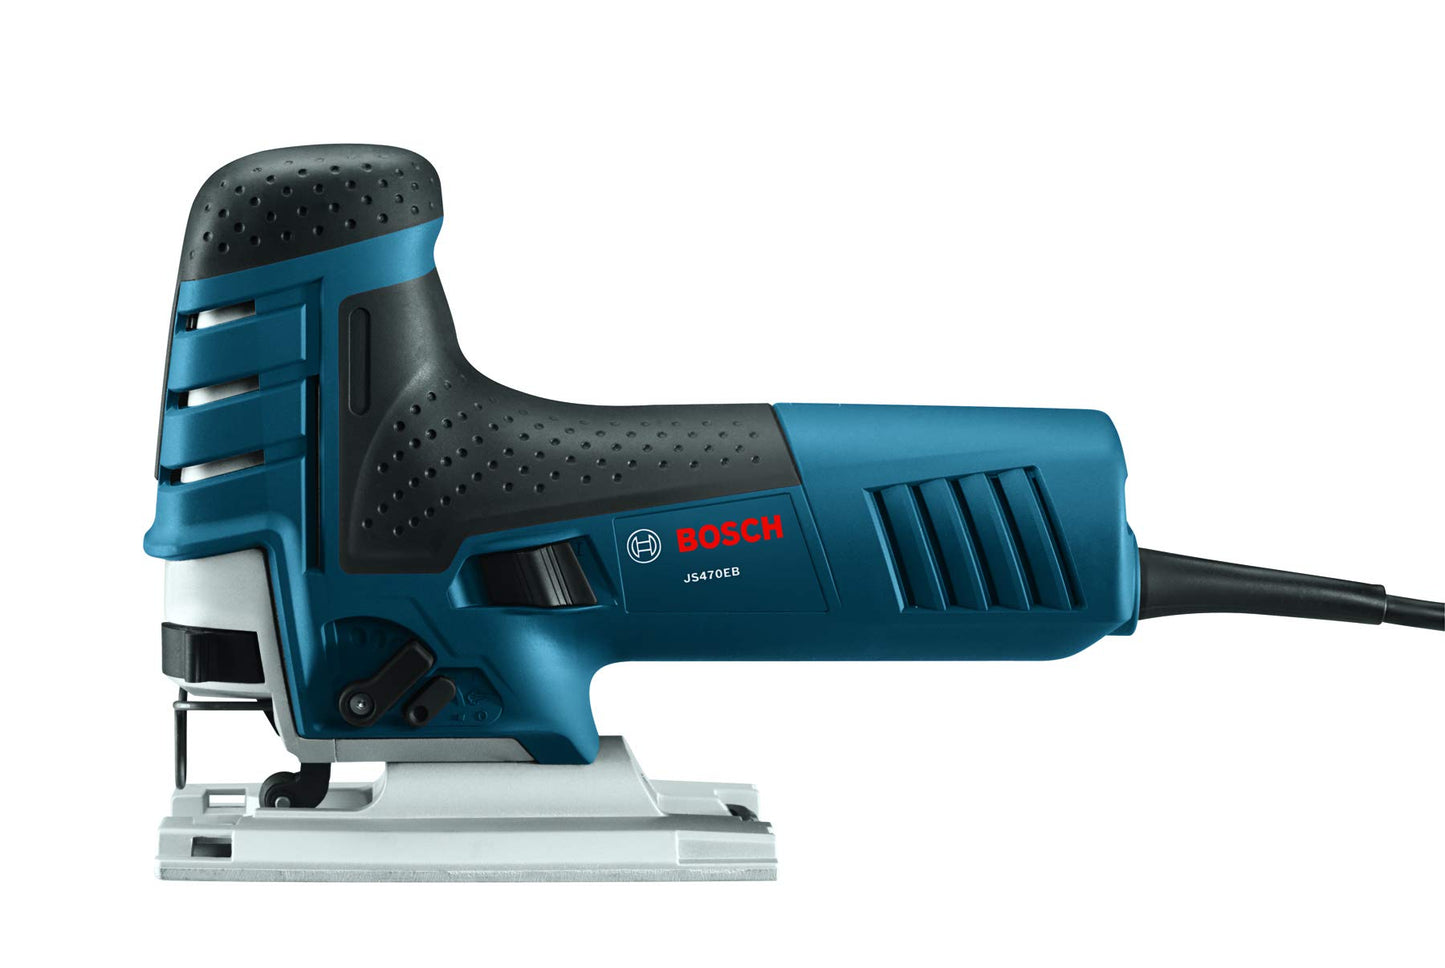 BOSCH JS470EB Corded Barrel-Grip Jig Saw - 120V Low Vibration, 7.0-Amp Variable Speed for Smooth Cutting up to Up To 5-7/8" Inch on Wood, 3/8" Inch